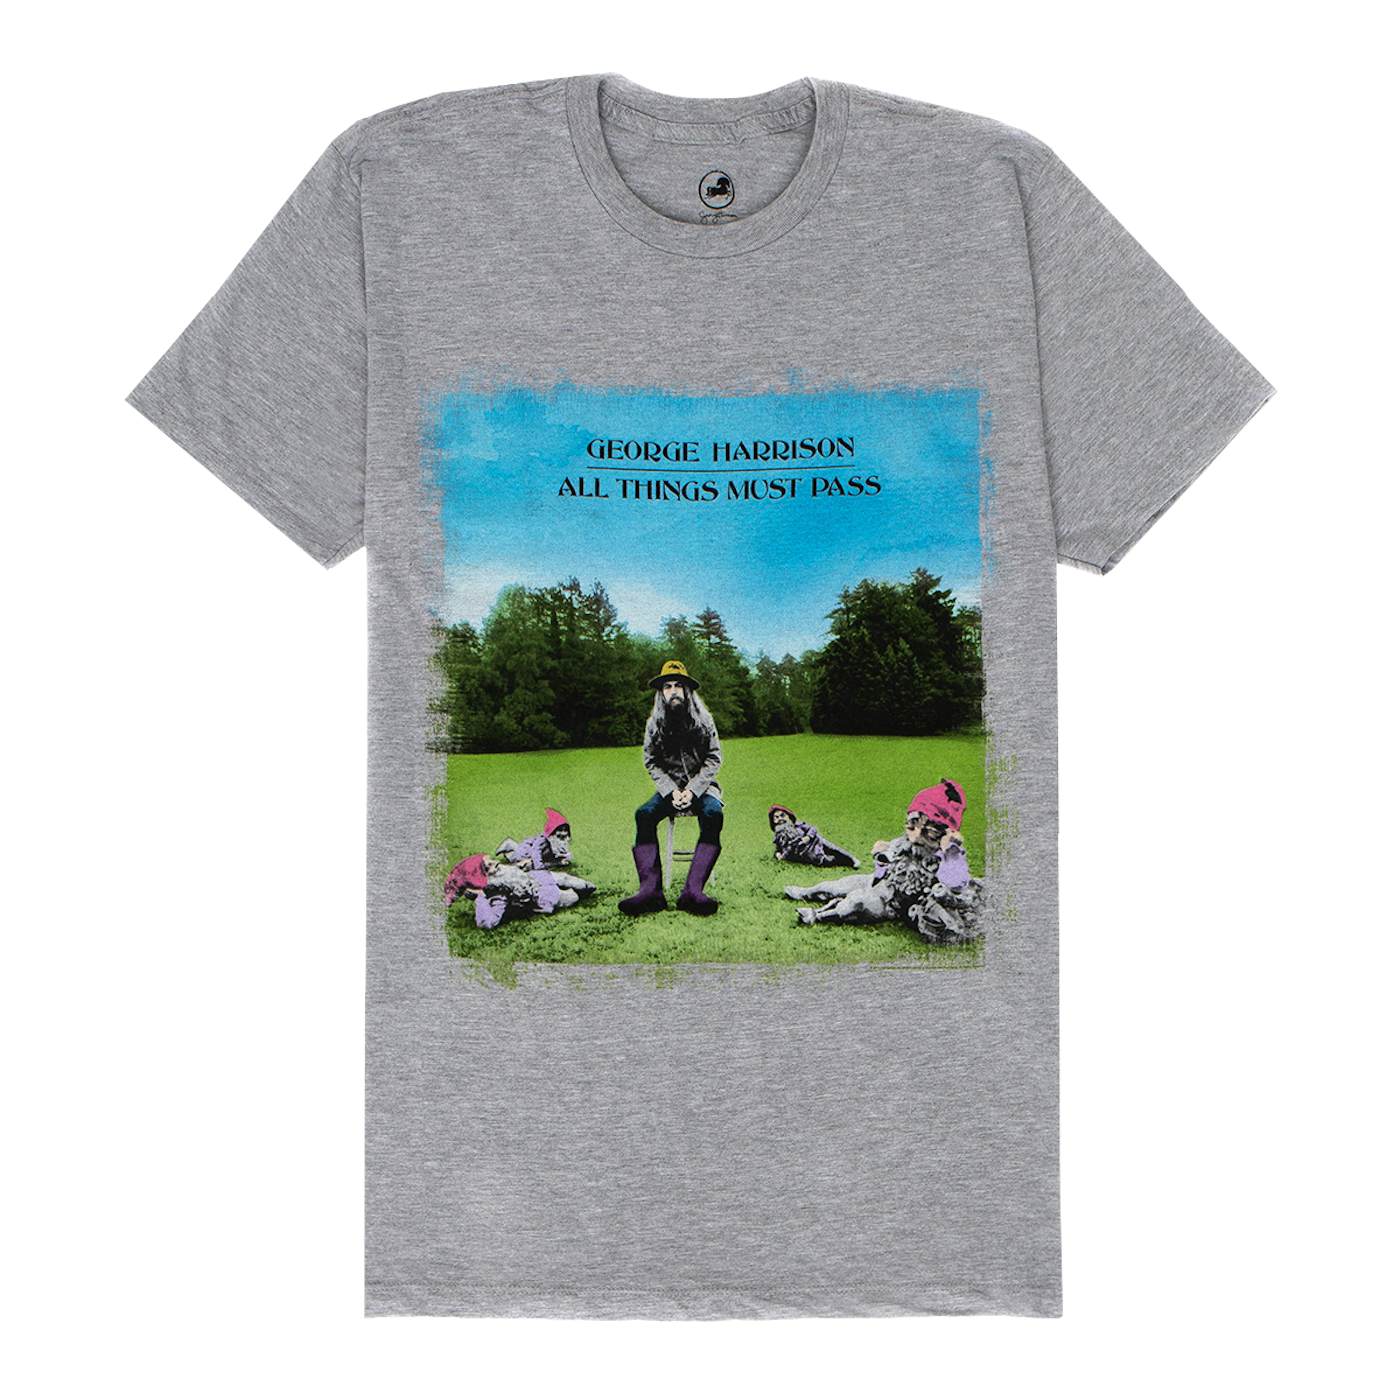 George Harrison All Things Must Pass Tee